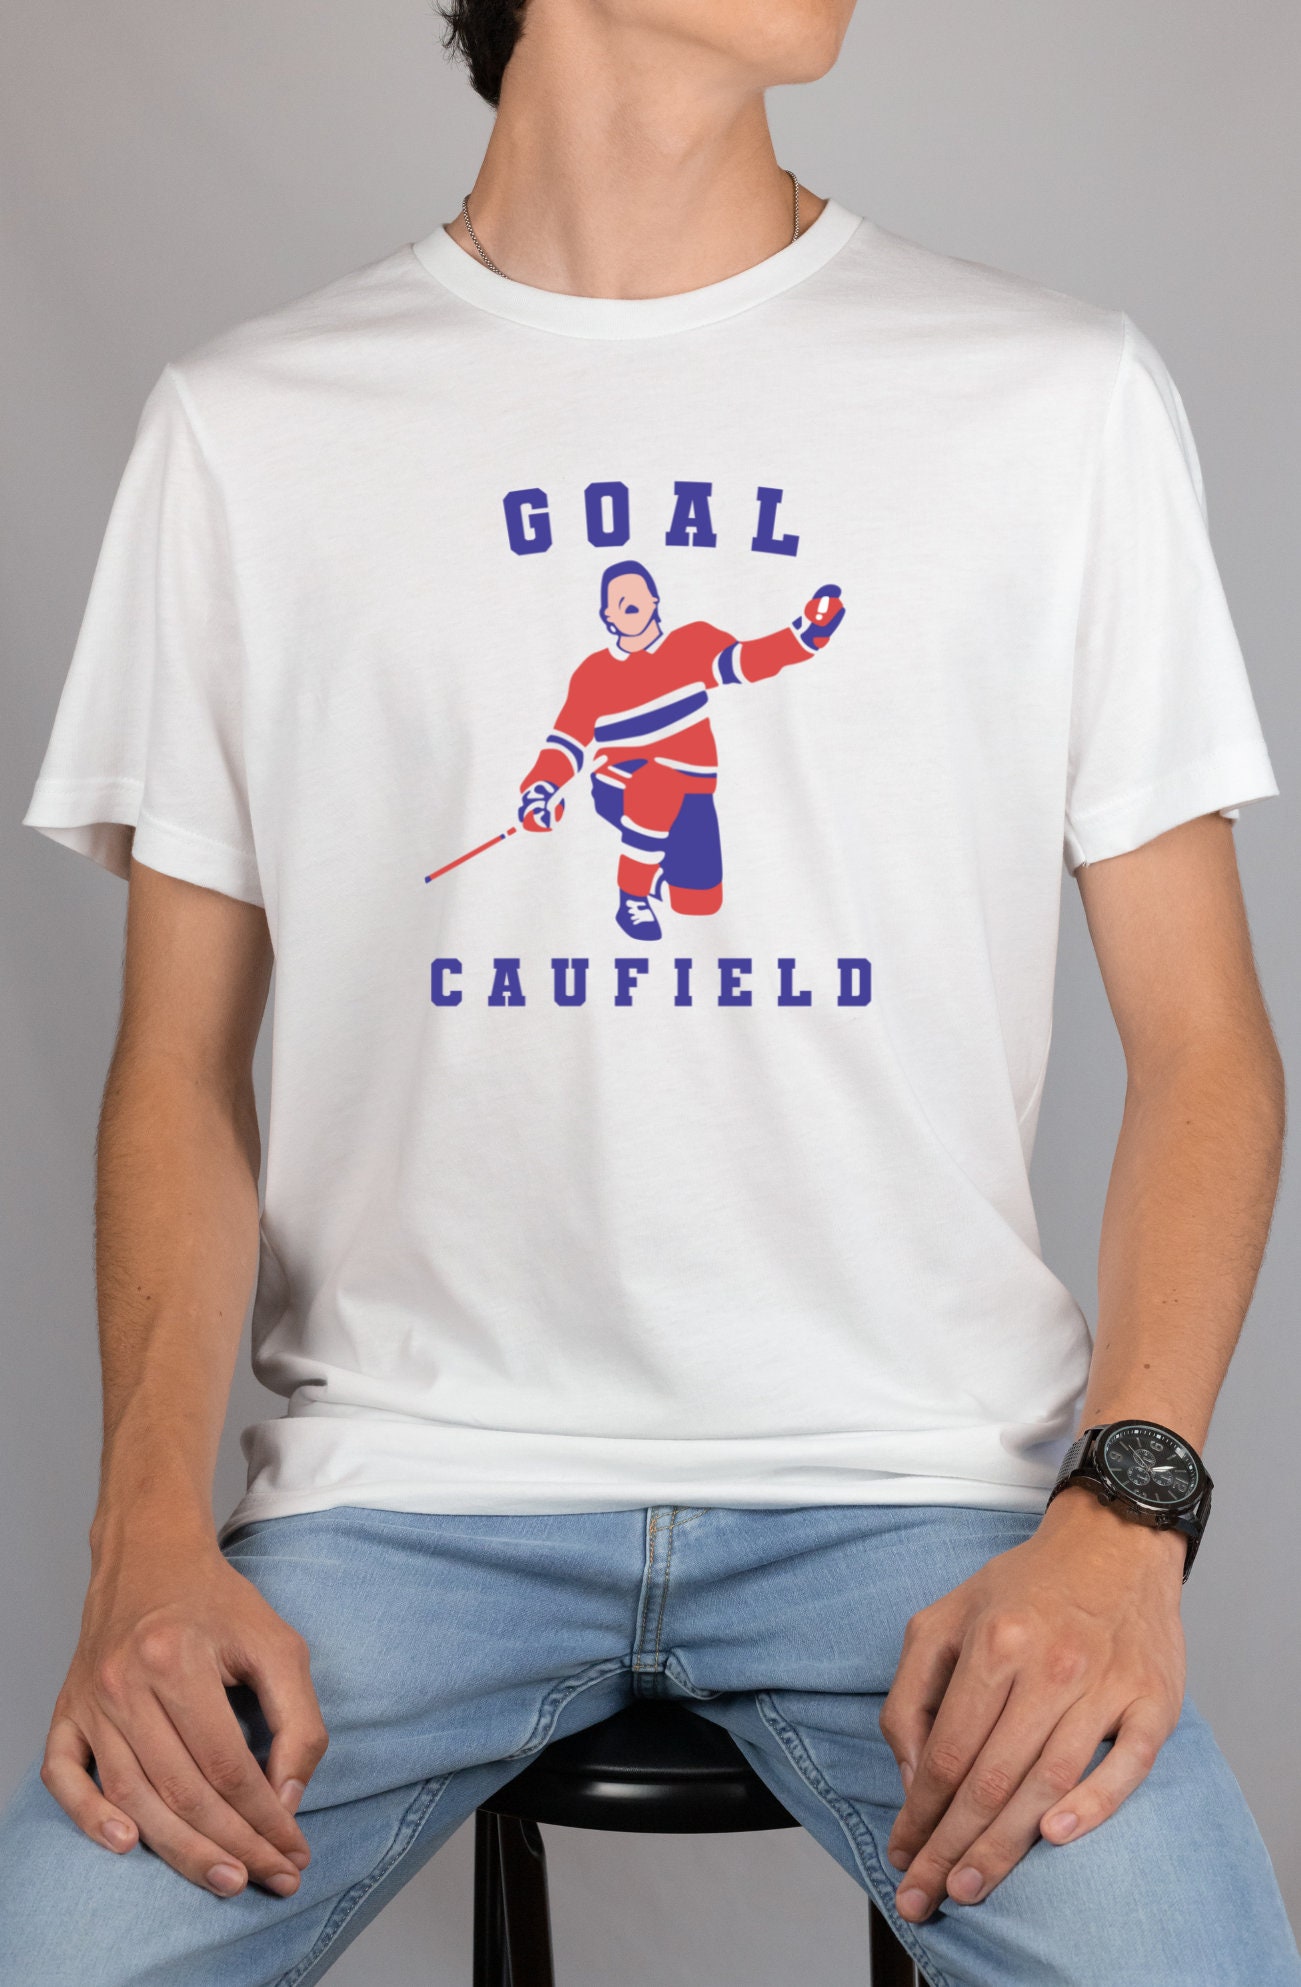 Caufield Jersey Essential T-Shirt for Sale by cocreations